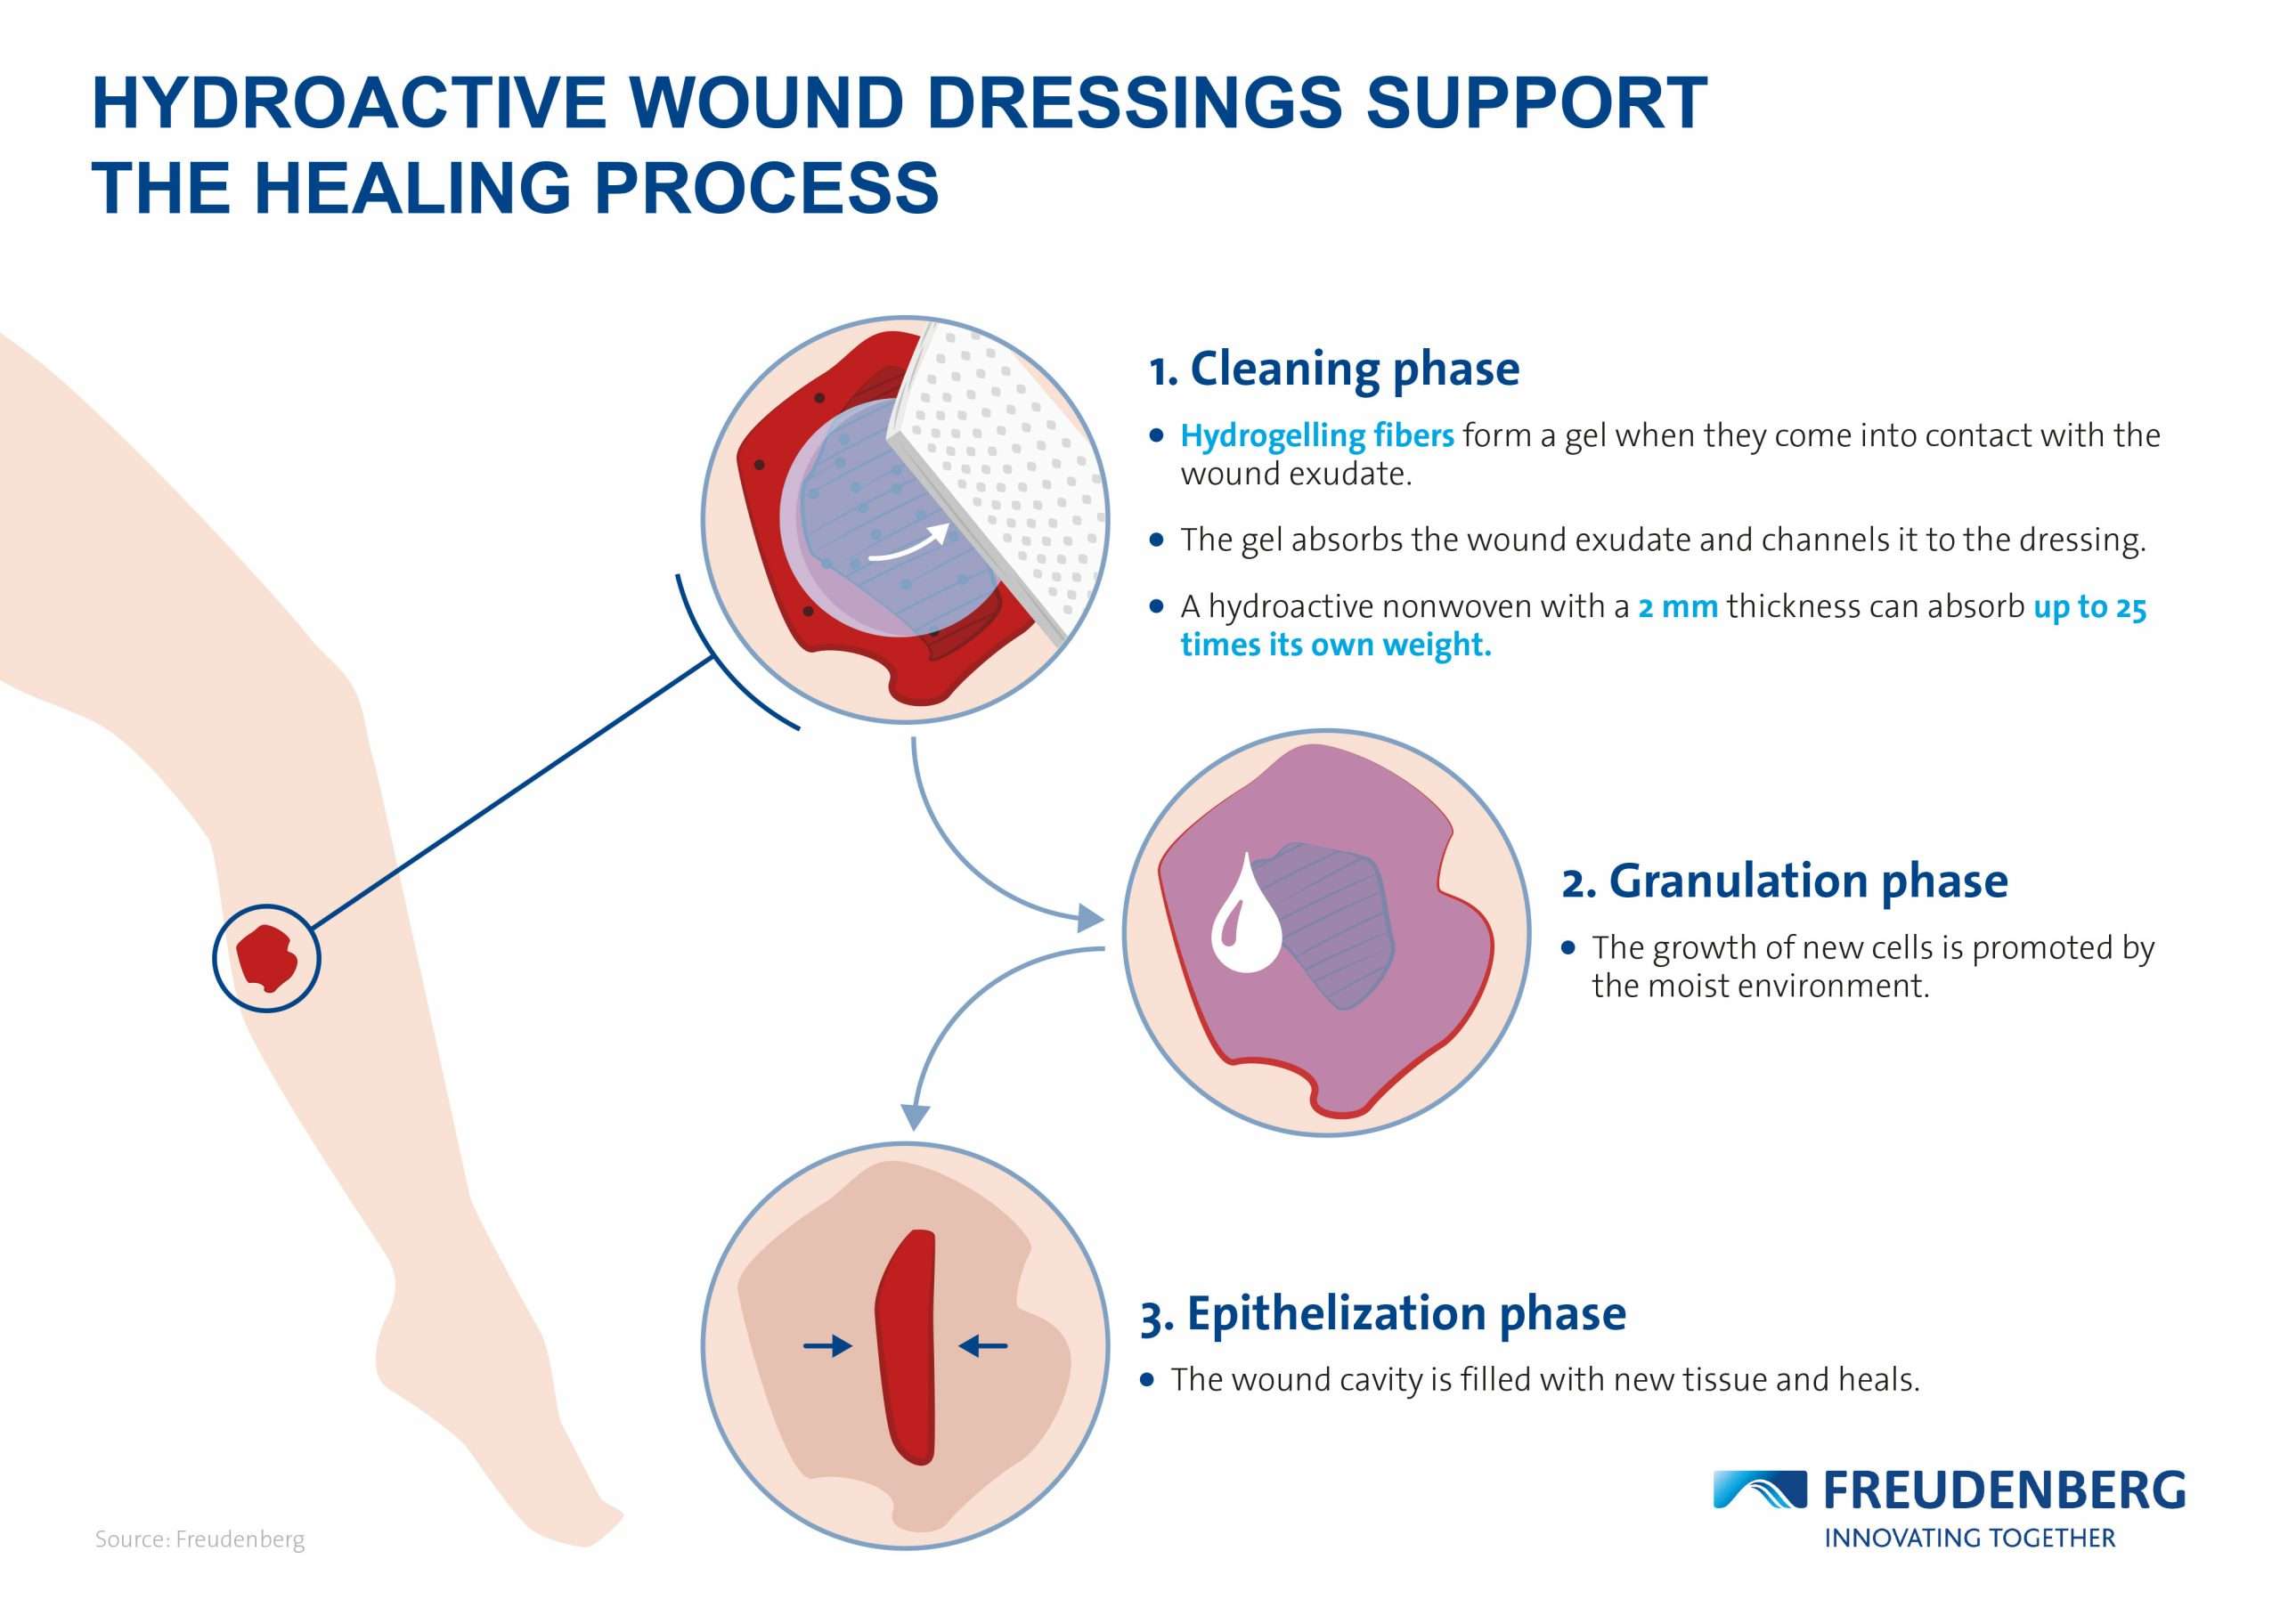 Hydroactive wound dressings